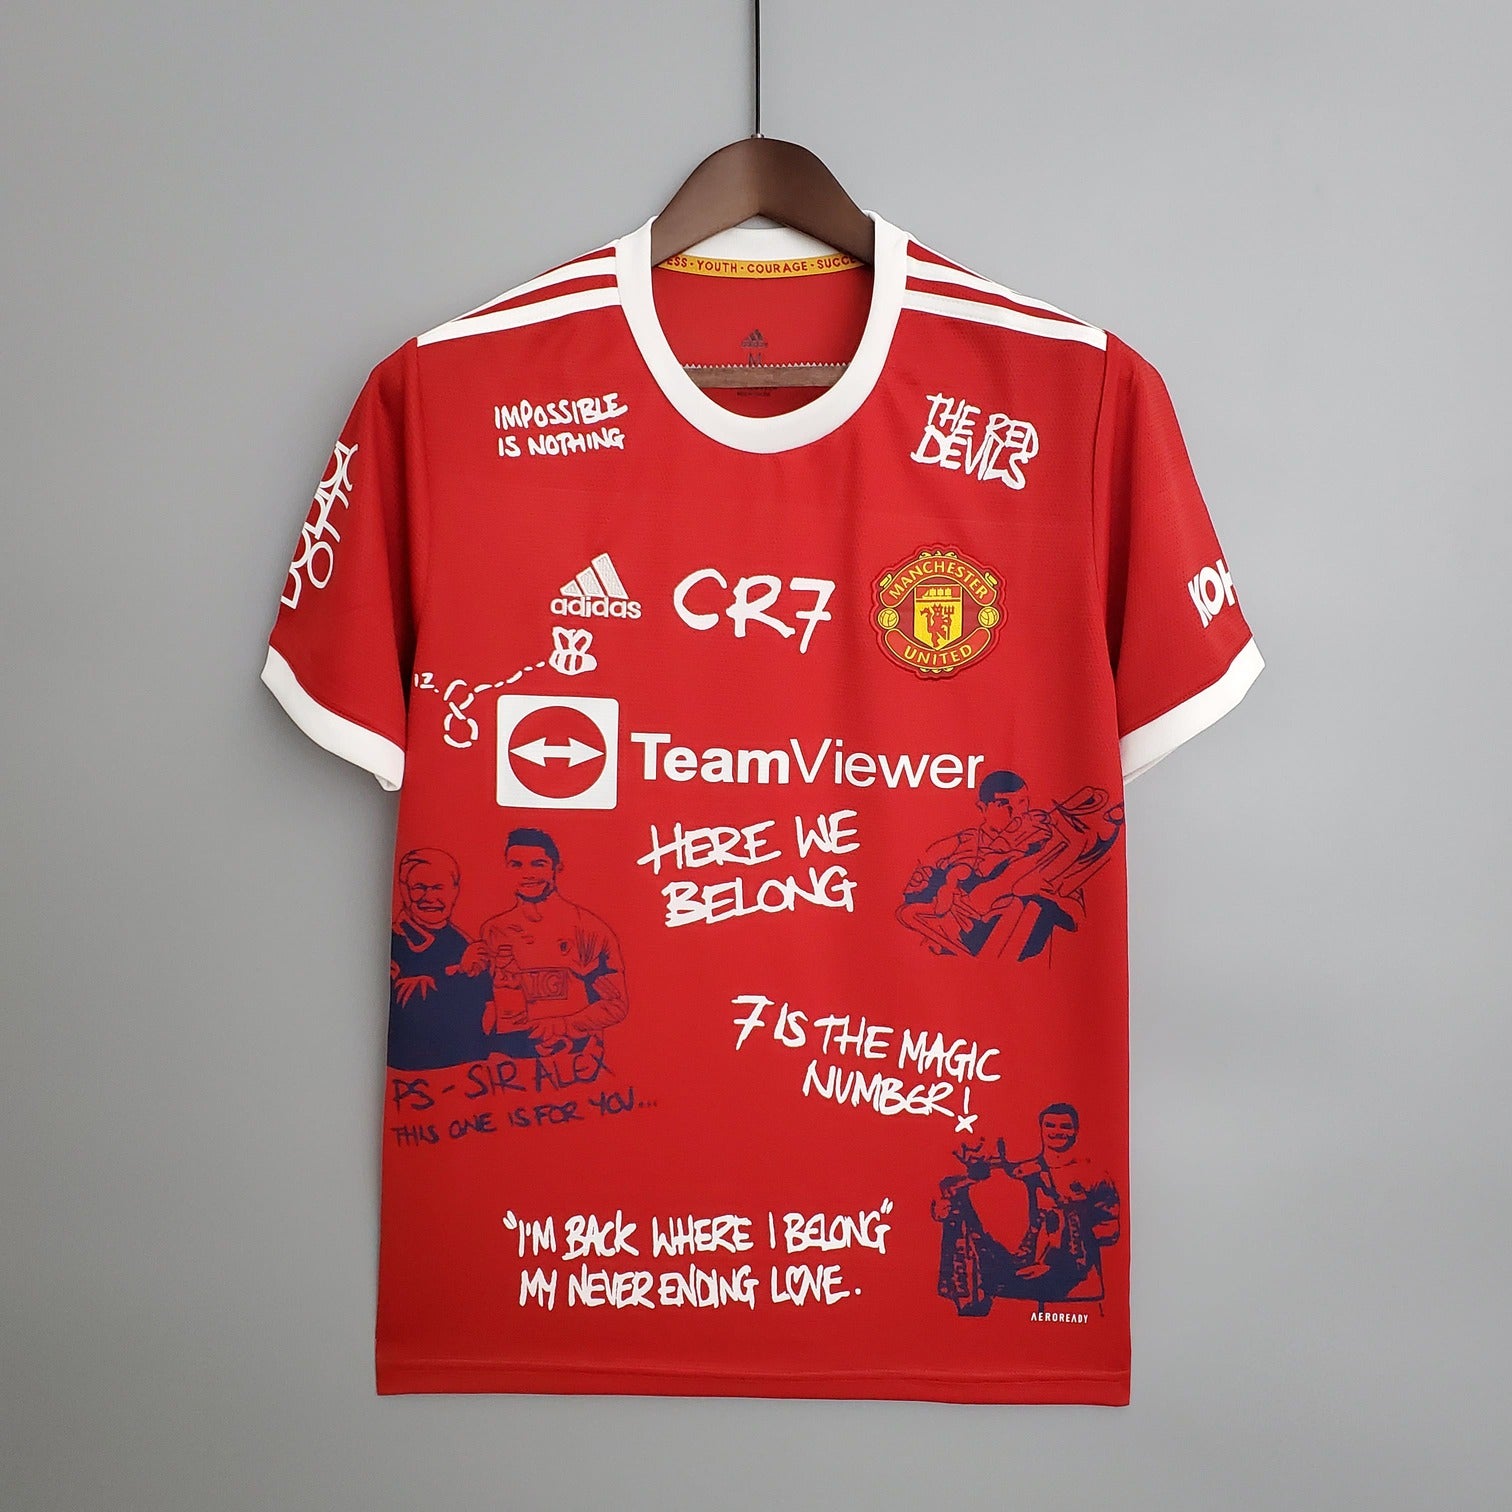 Manchester United x CR7 Special Kit